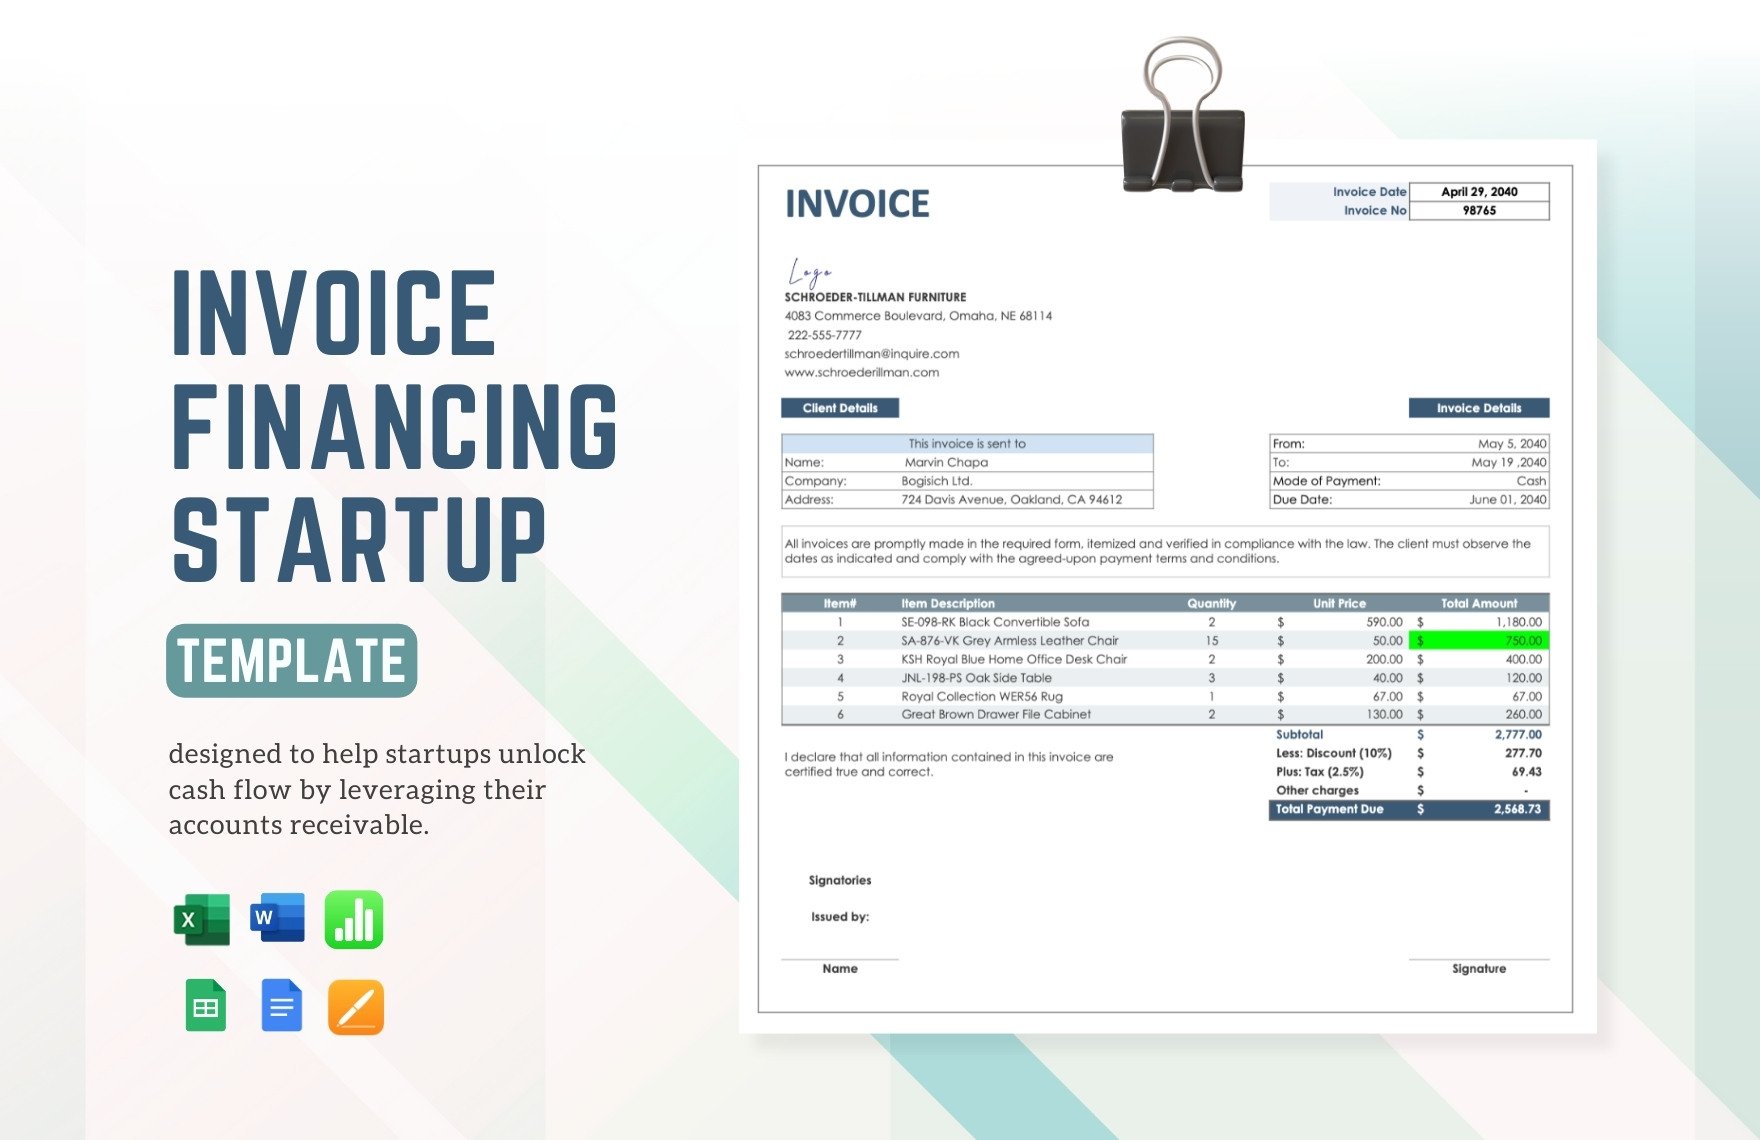 Free Invoice Financing Startup Template in Word, Google Docs, Excel, Google Sheets, PSD, Apple Pages